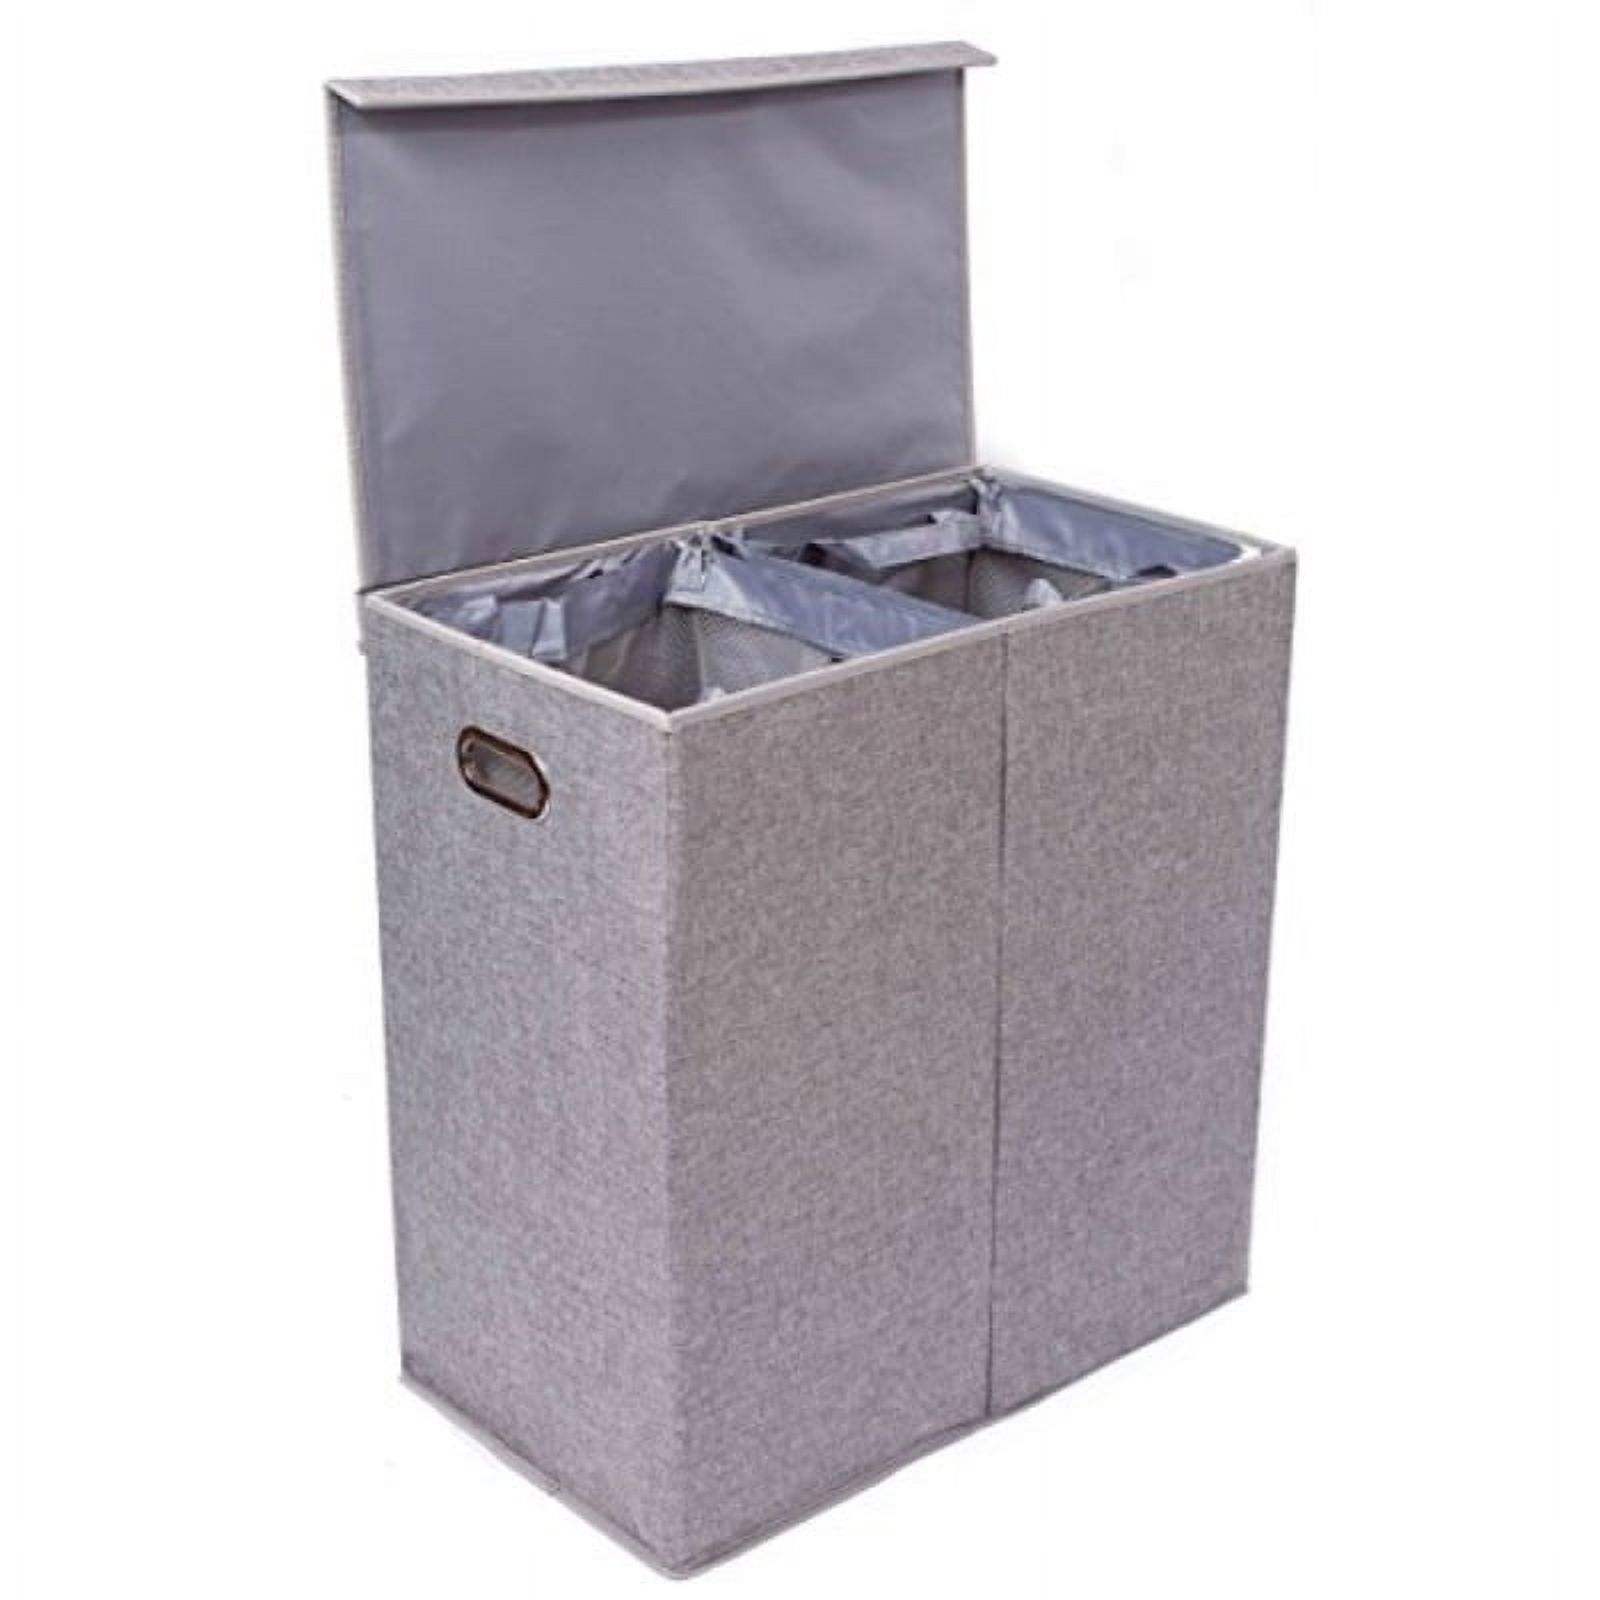 BirdRock Home Double Linen Laundry Hamper with Lid and Removable Liners - Grey - image 1 of 10